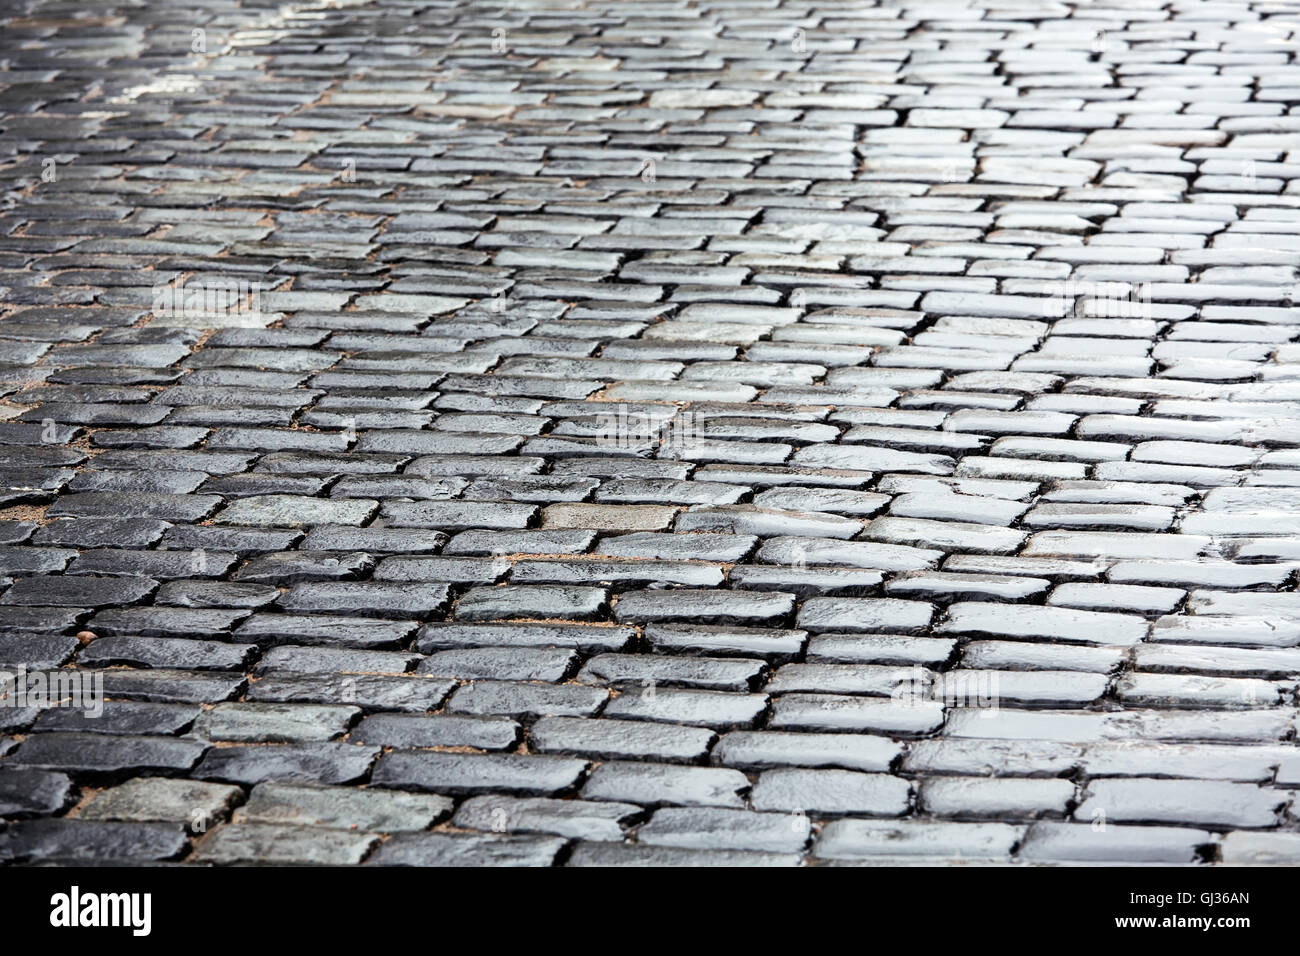 Grey cobblestone road with reflection after rain Stock Photo